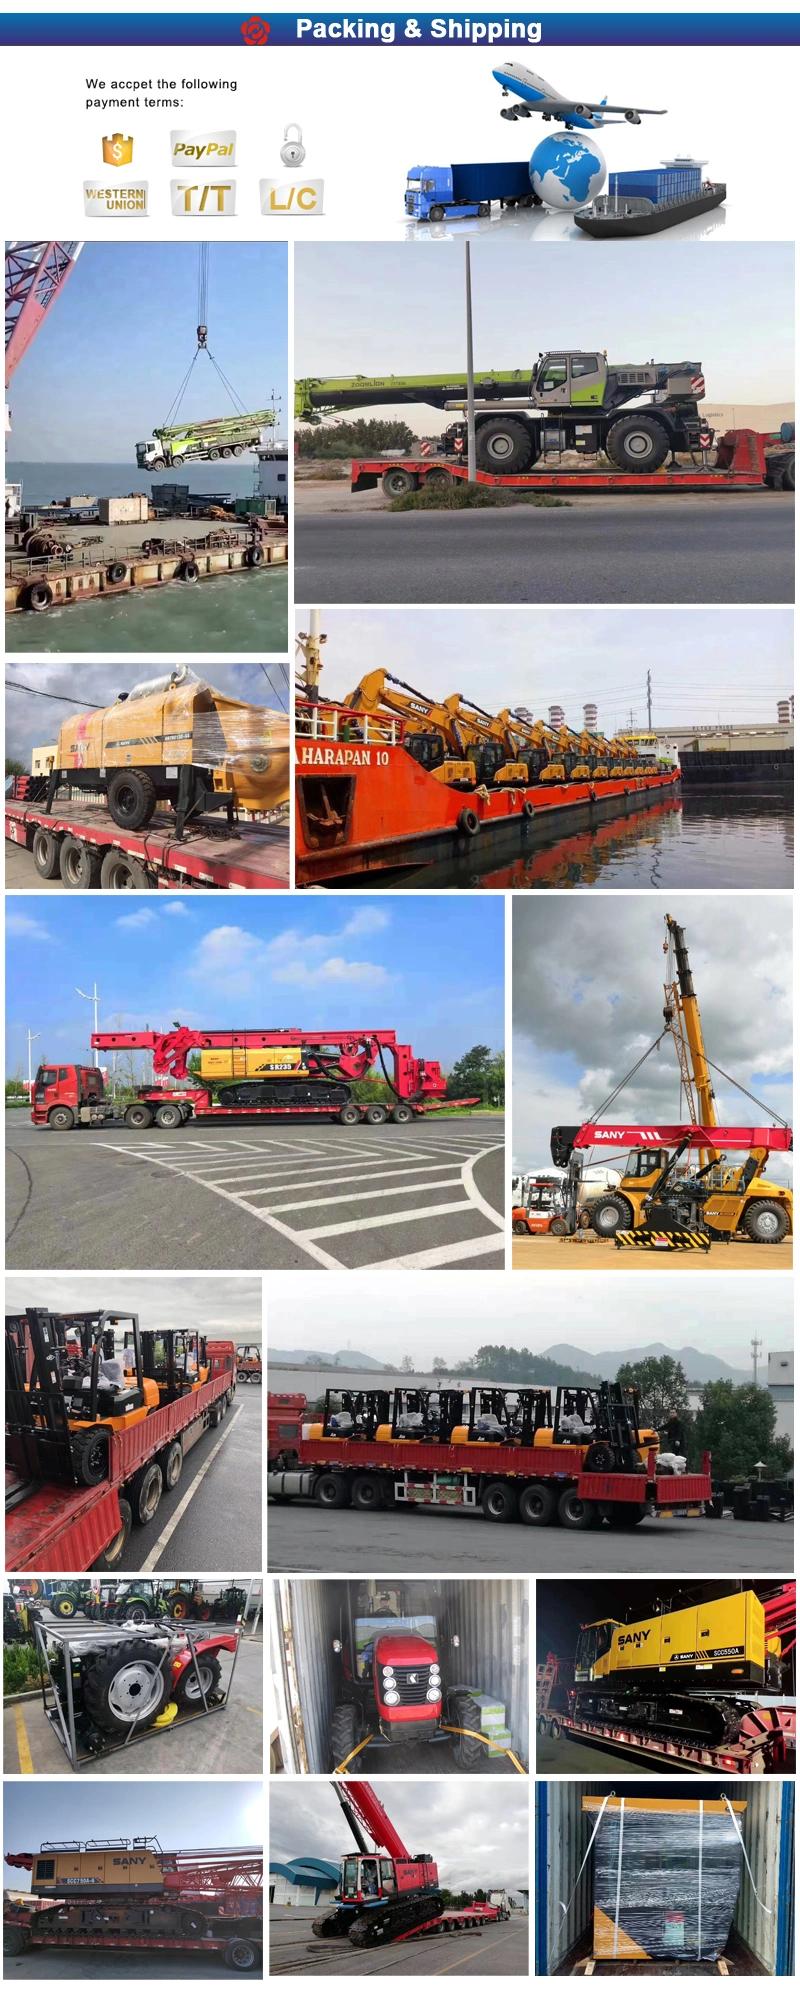 Building Lifting Equipment Xct25L4_Y 25t Pickup Truck Crane for Sale in China